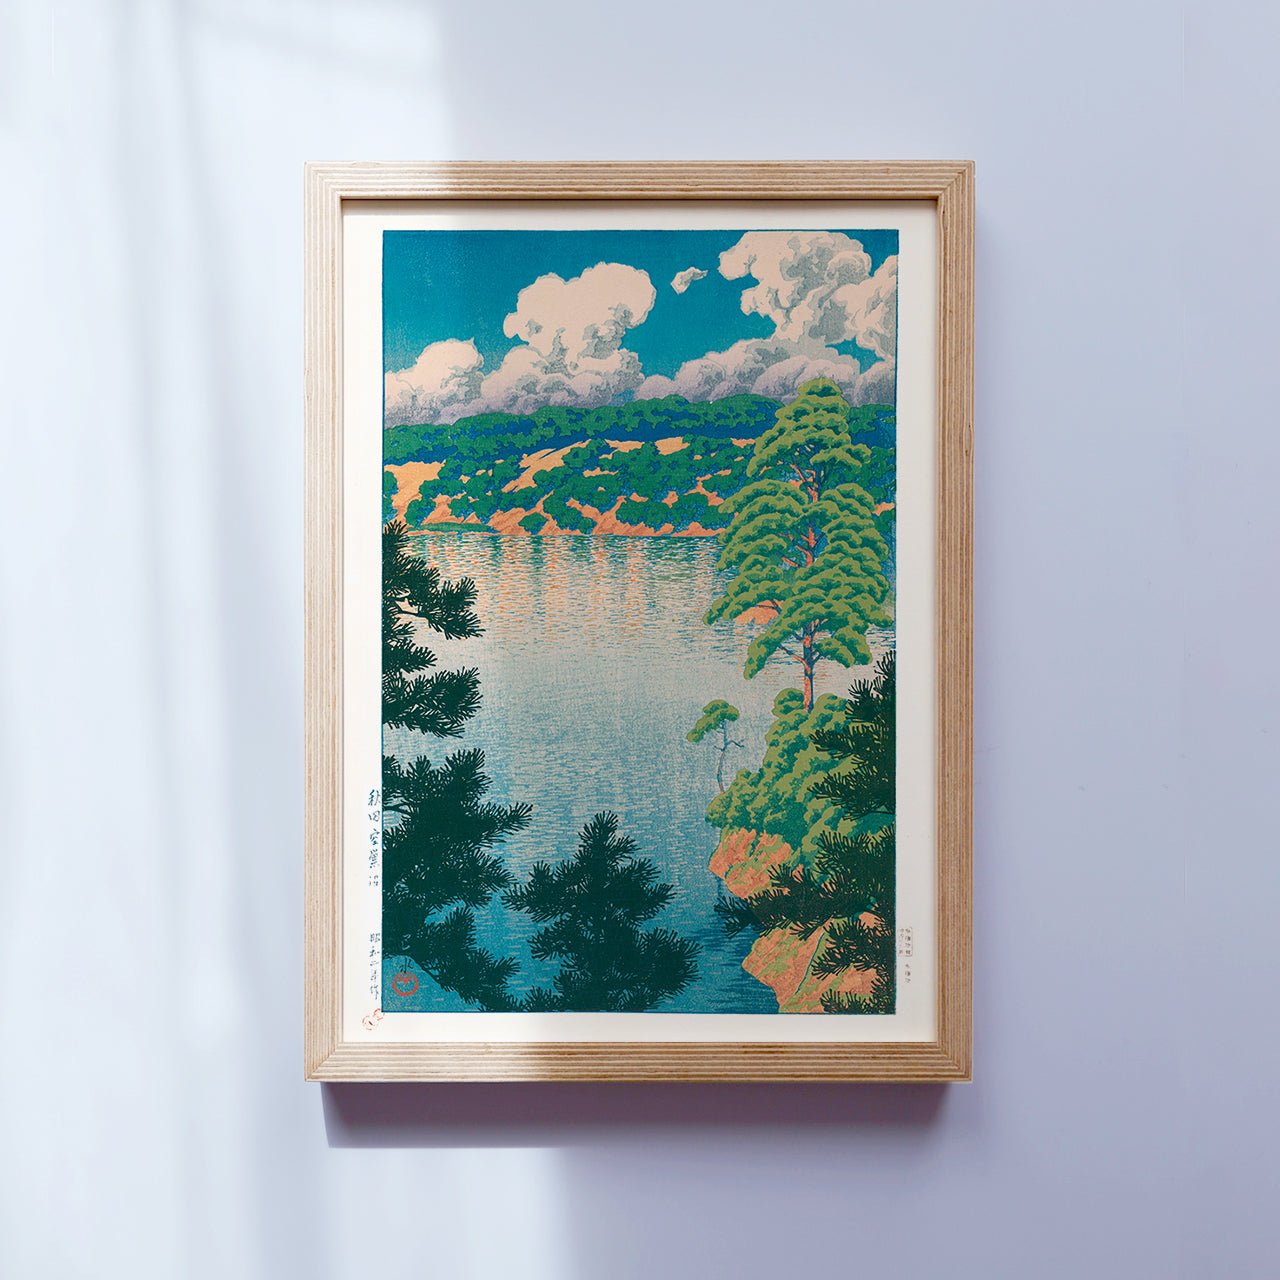 Framed Japanese Art Poster by Kawase Hasui, featuring a serene lake surrounded by trees